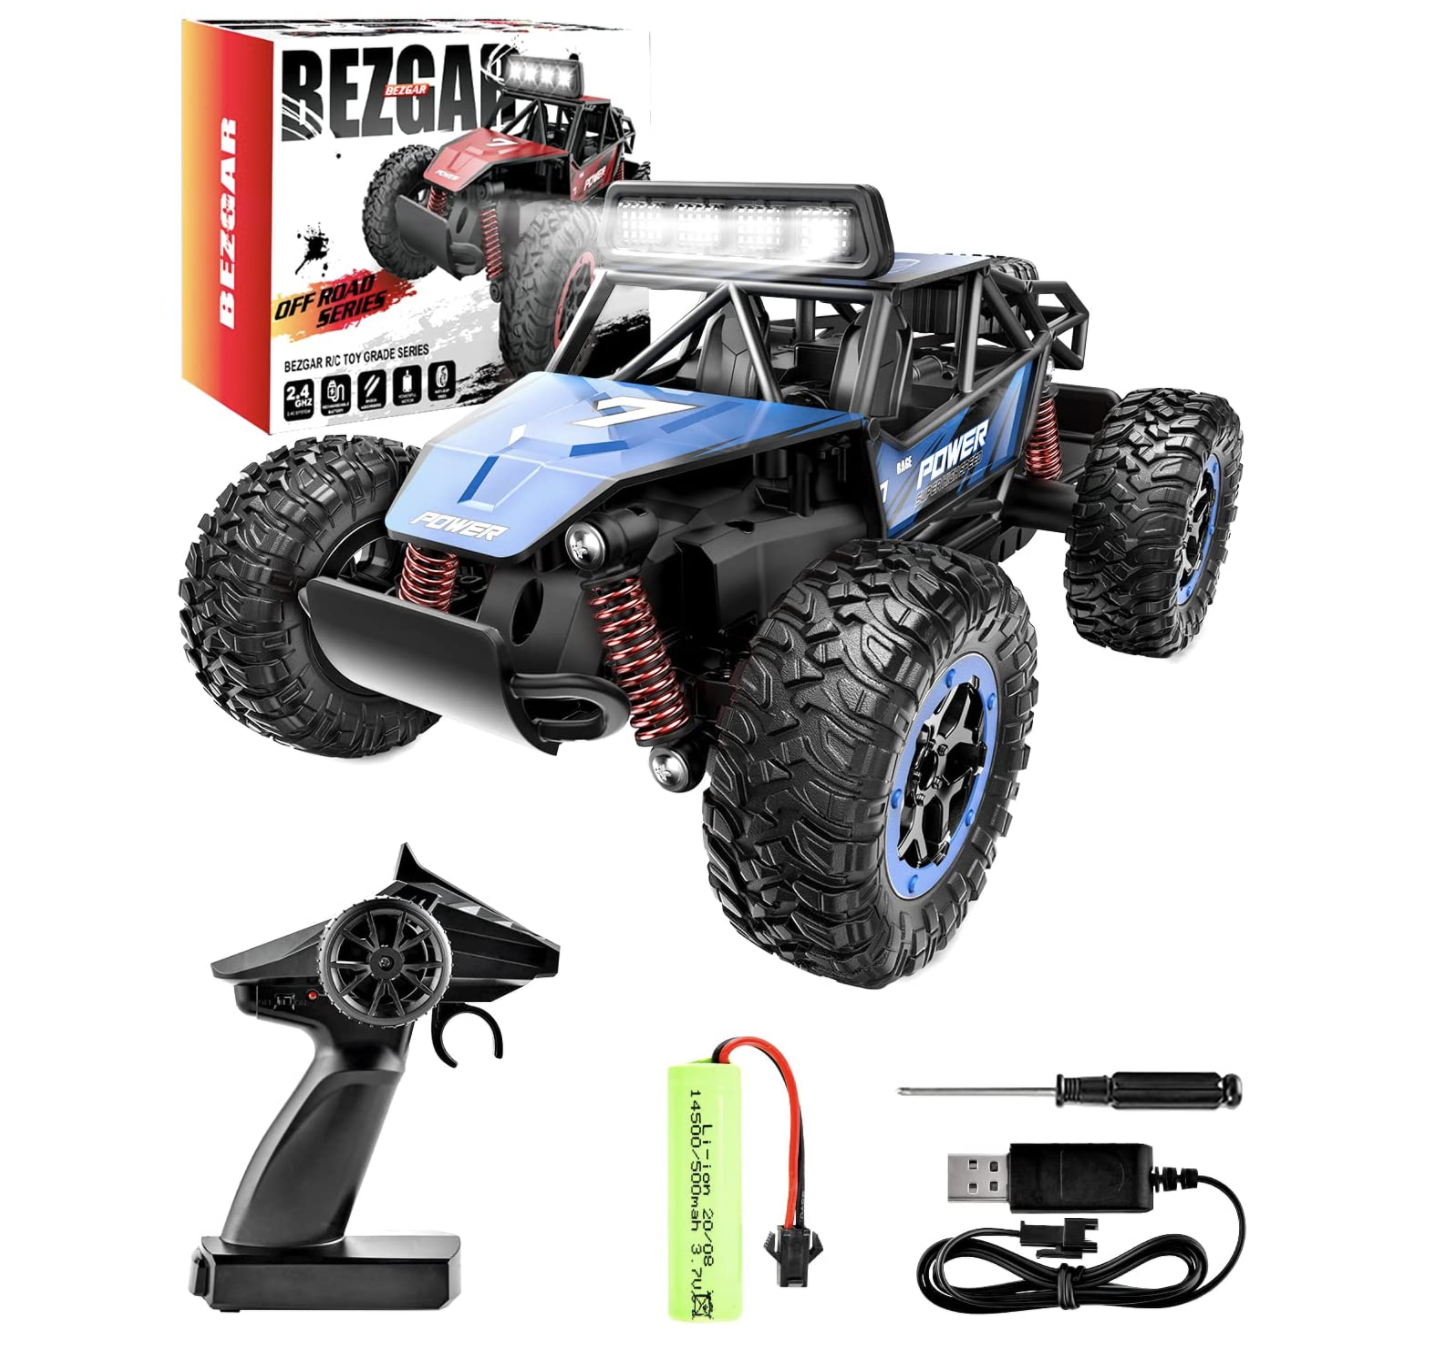 6 wheel drive R/C car with camera Connects to phone original cost $199! 